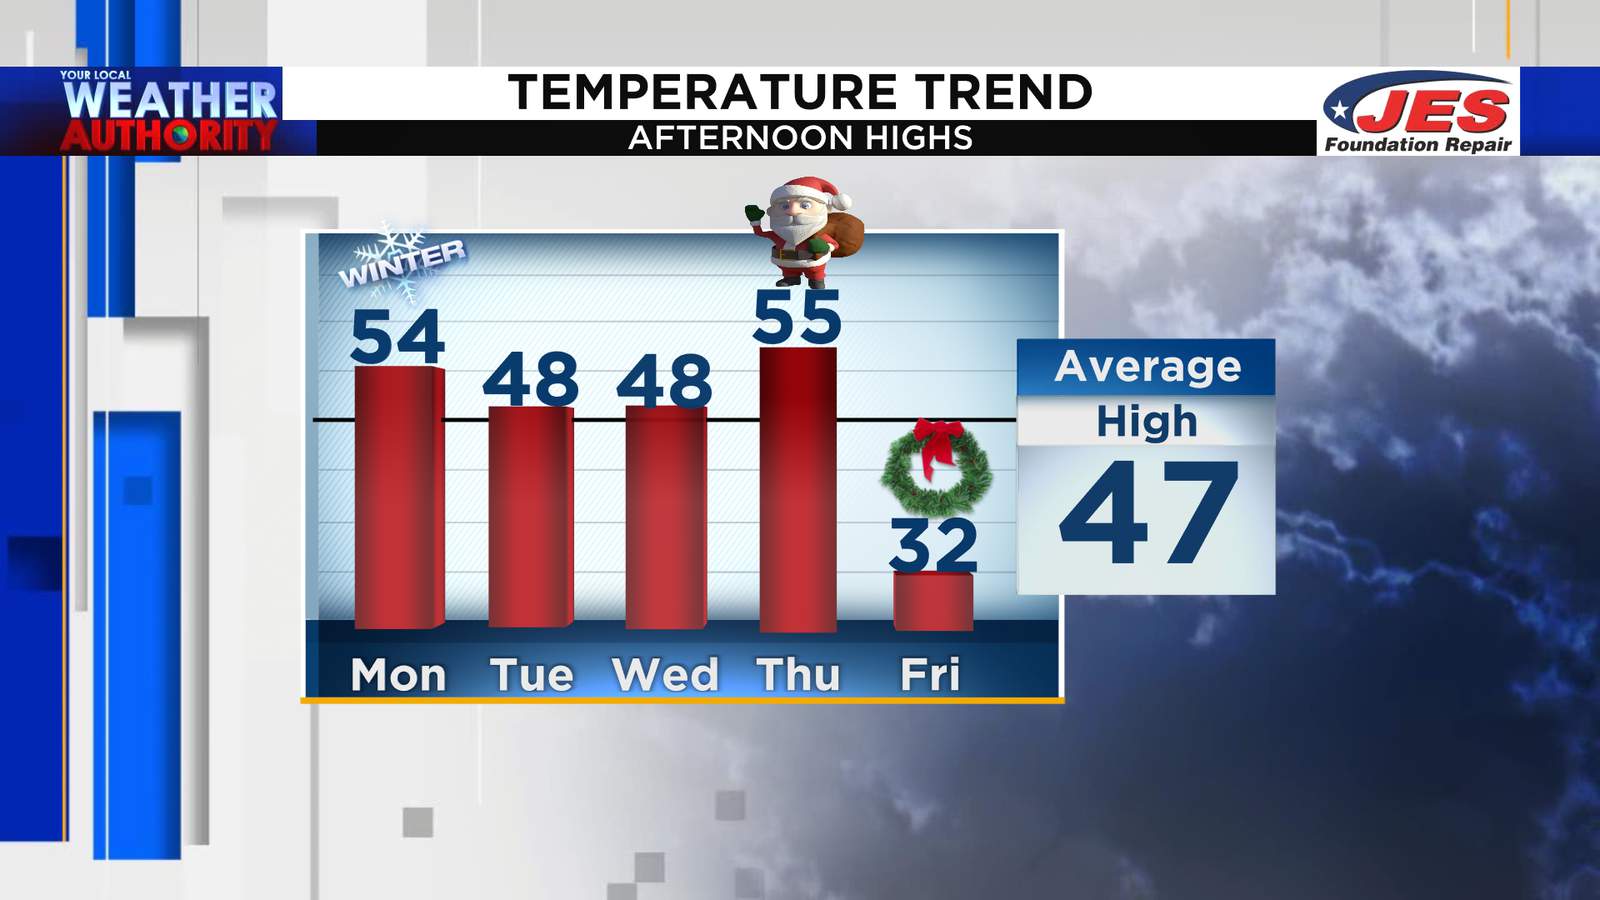 Ups and downs in the temperature department for the holiday week